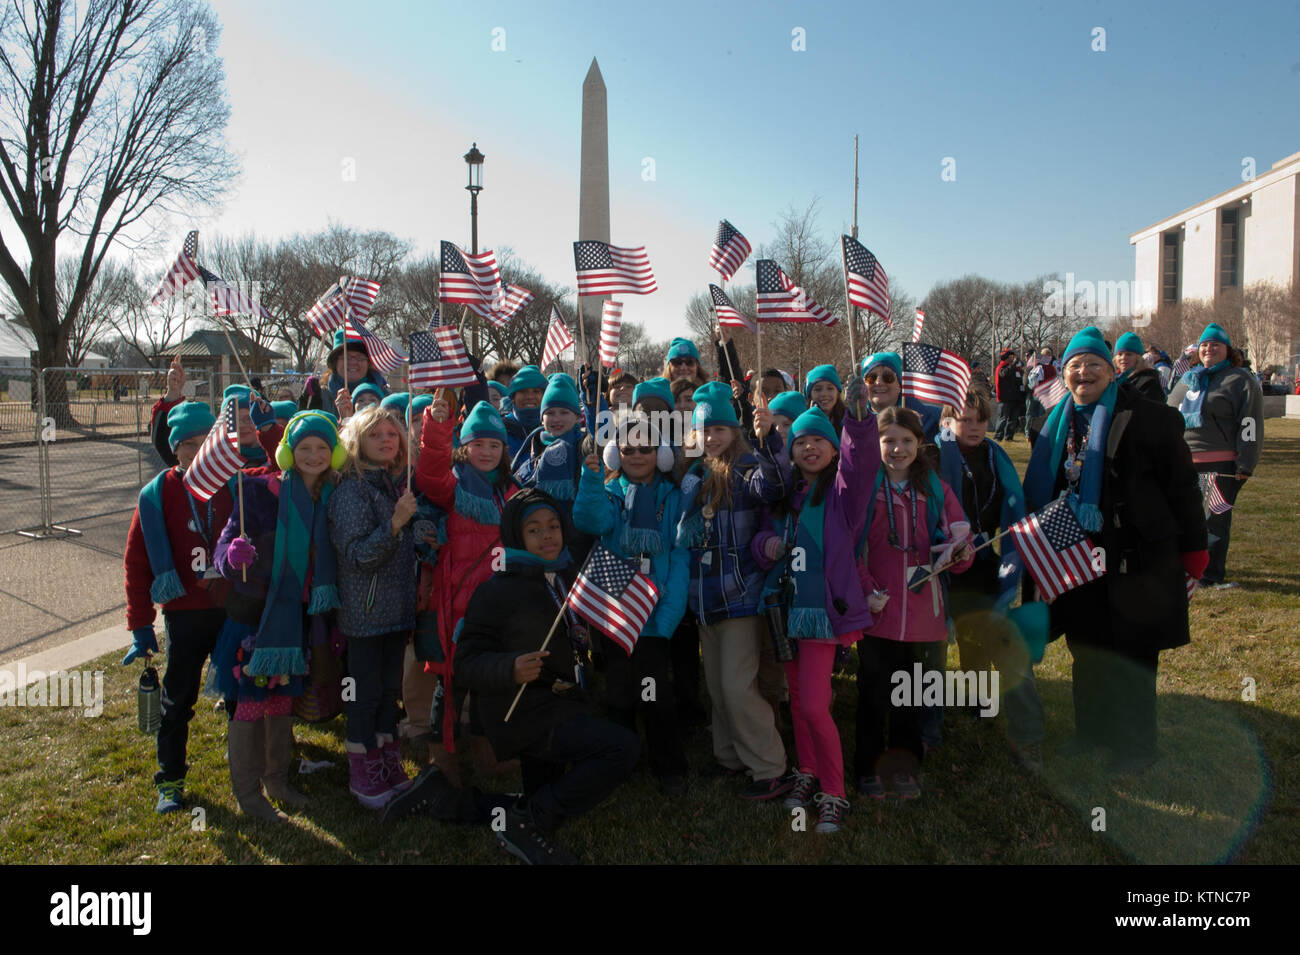 WASHINGTON, D.C. — – A group of students, from the People to People International Student Ambassador Program, wave Amercian flags in front of the George Washington Monument before heading to the Presidential Inauguration Parade. People To People was founded in 1956 by President Dwight D. Eisenhower with a mission to bridge cultural and political borders through education and exchange, creating global citizens and making the world a better place for future generations.   the 57th Presidential Inauguration was held in Washington D.C. on Monday, January 21, 2013. The Inauguration included the Pre Stock Photo